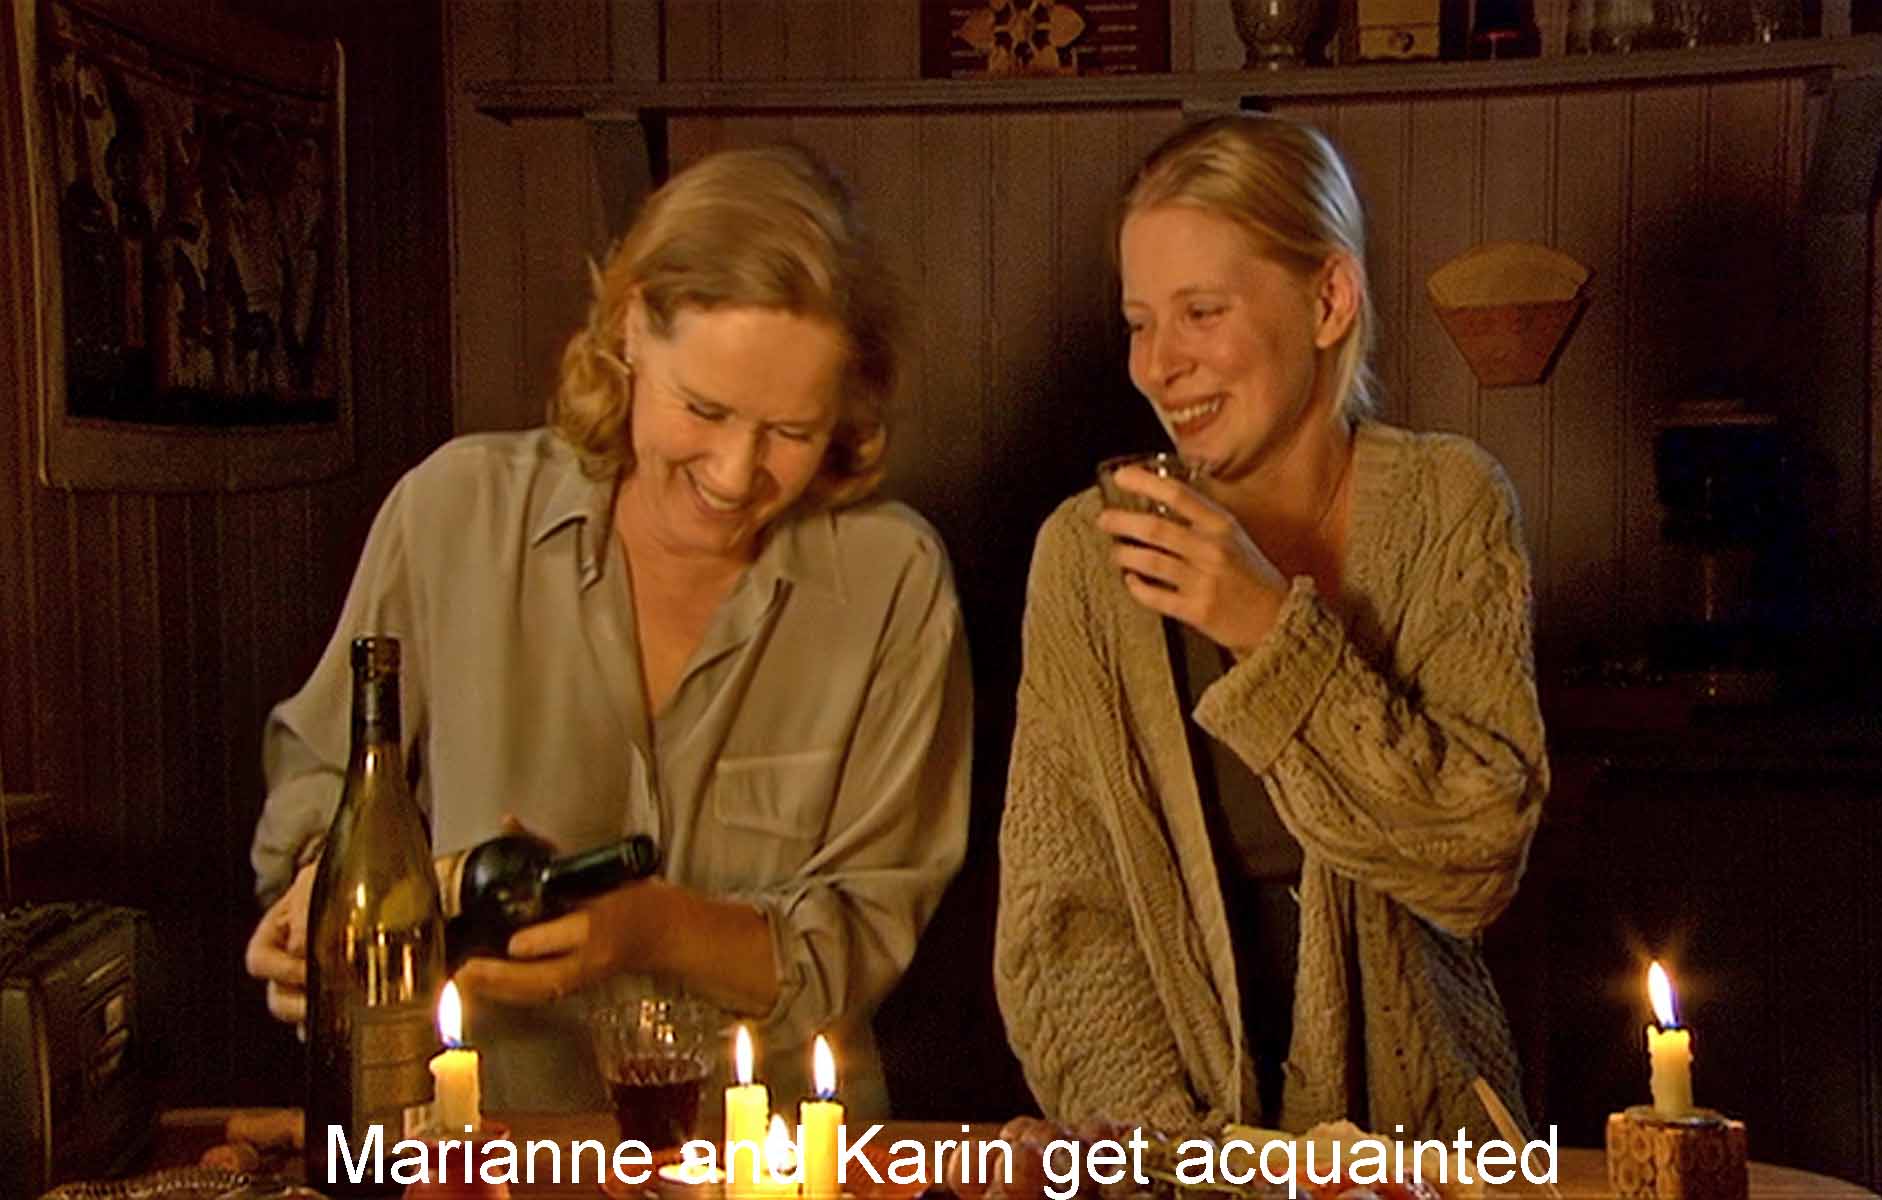  Karin and Marianne get acquainted